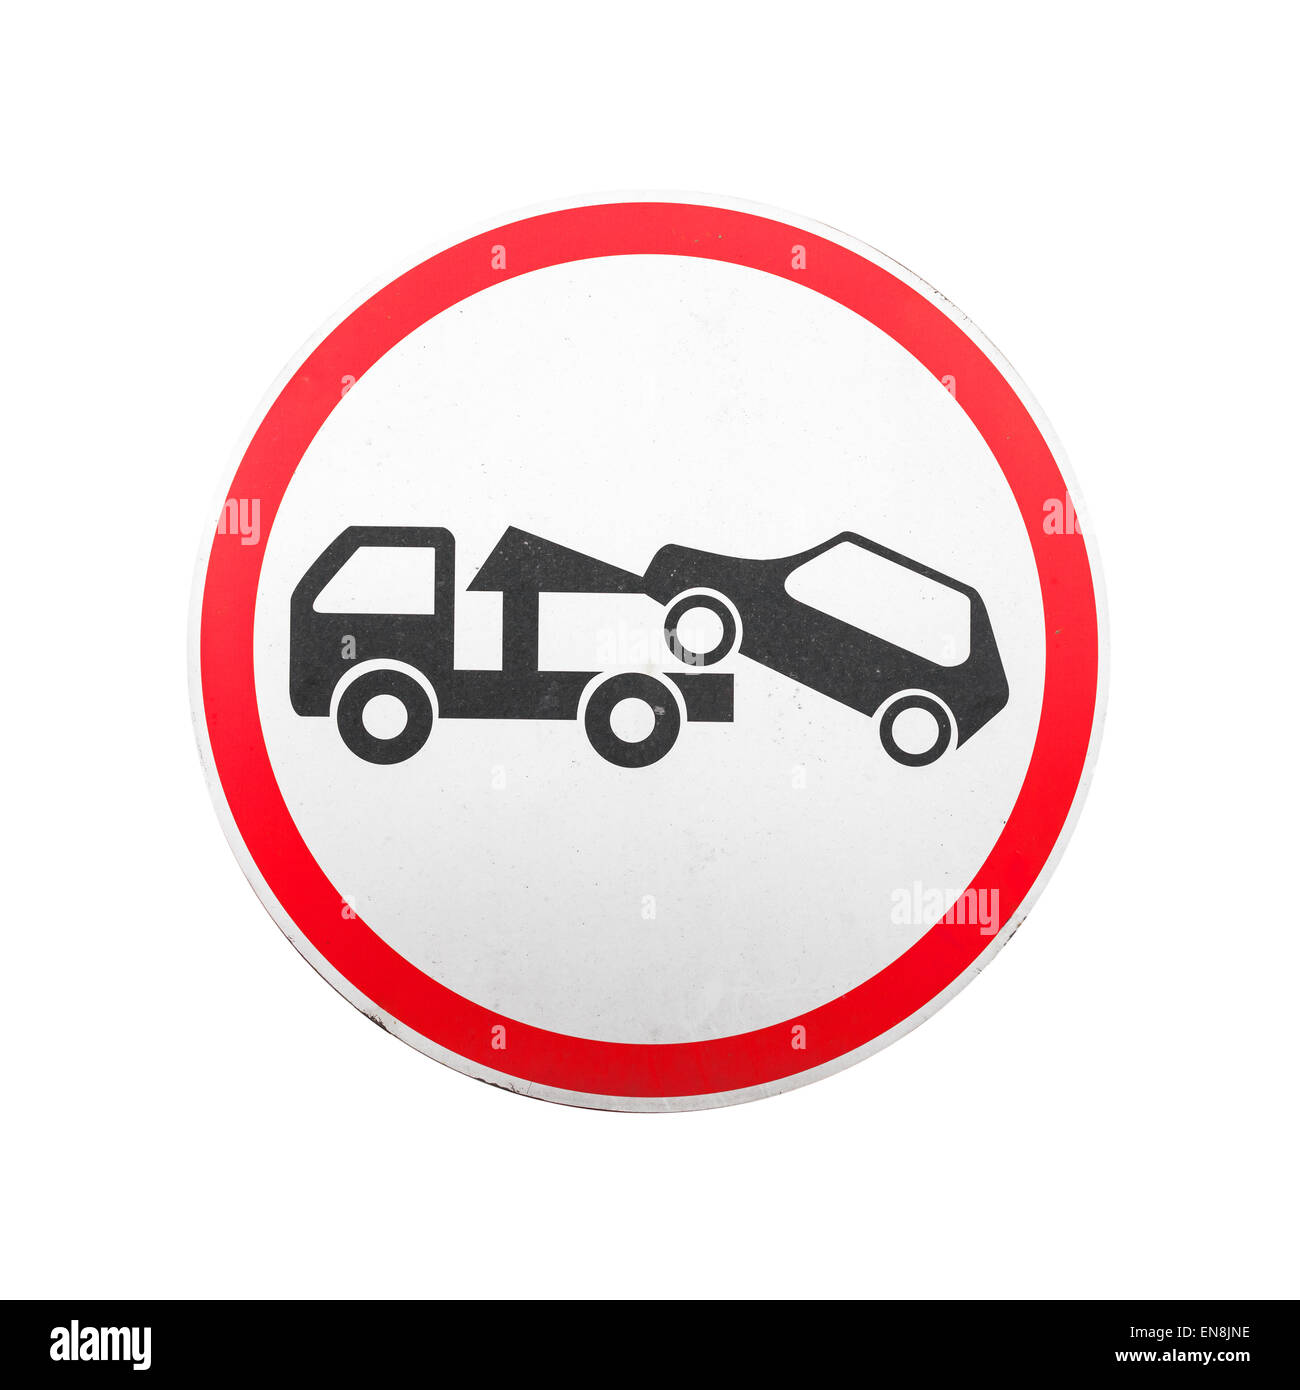 Evacuation on tow truck. Round red, black and white road sign isolated on white background Stock Photo